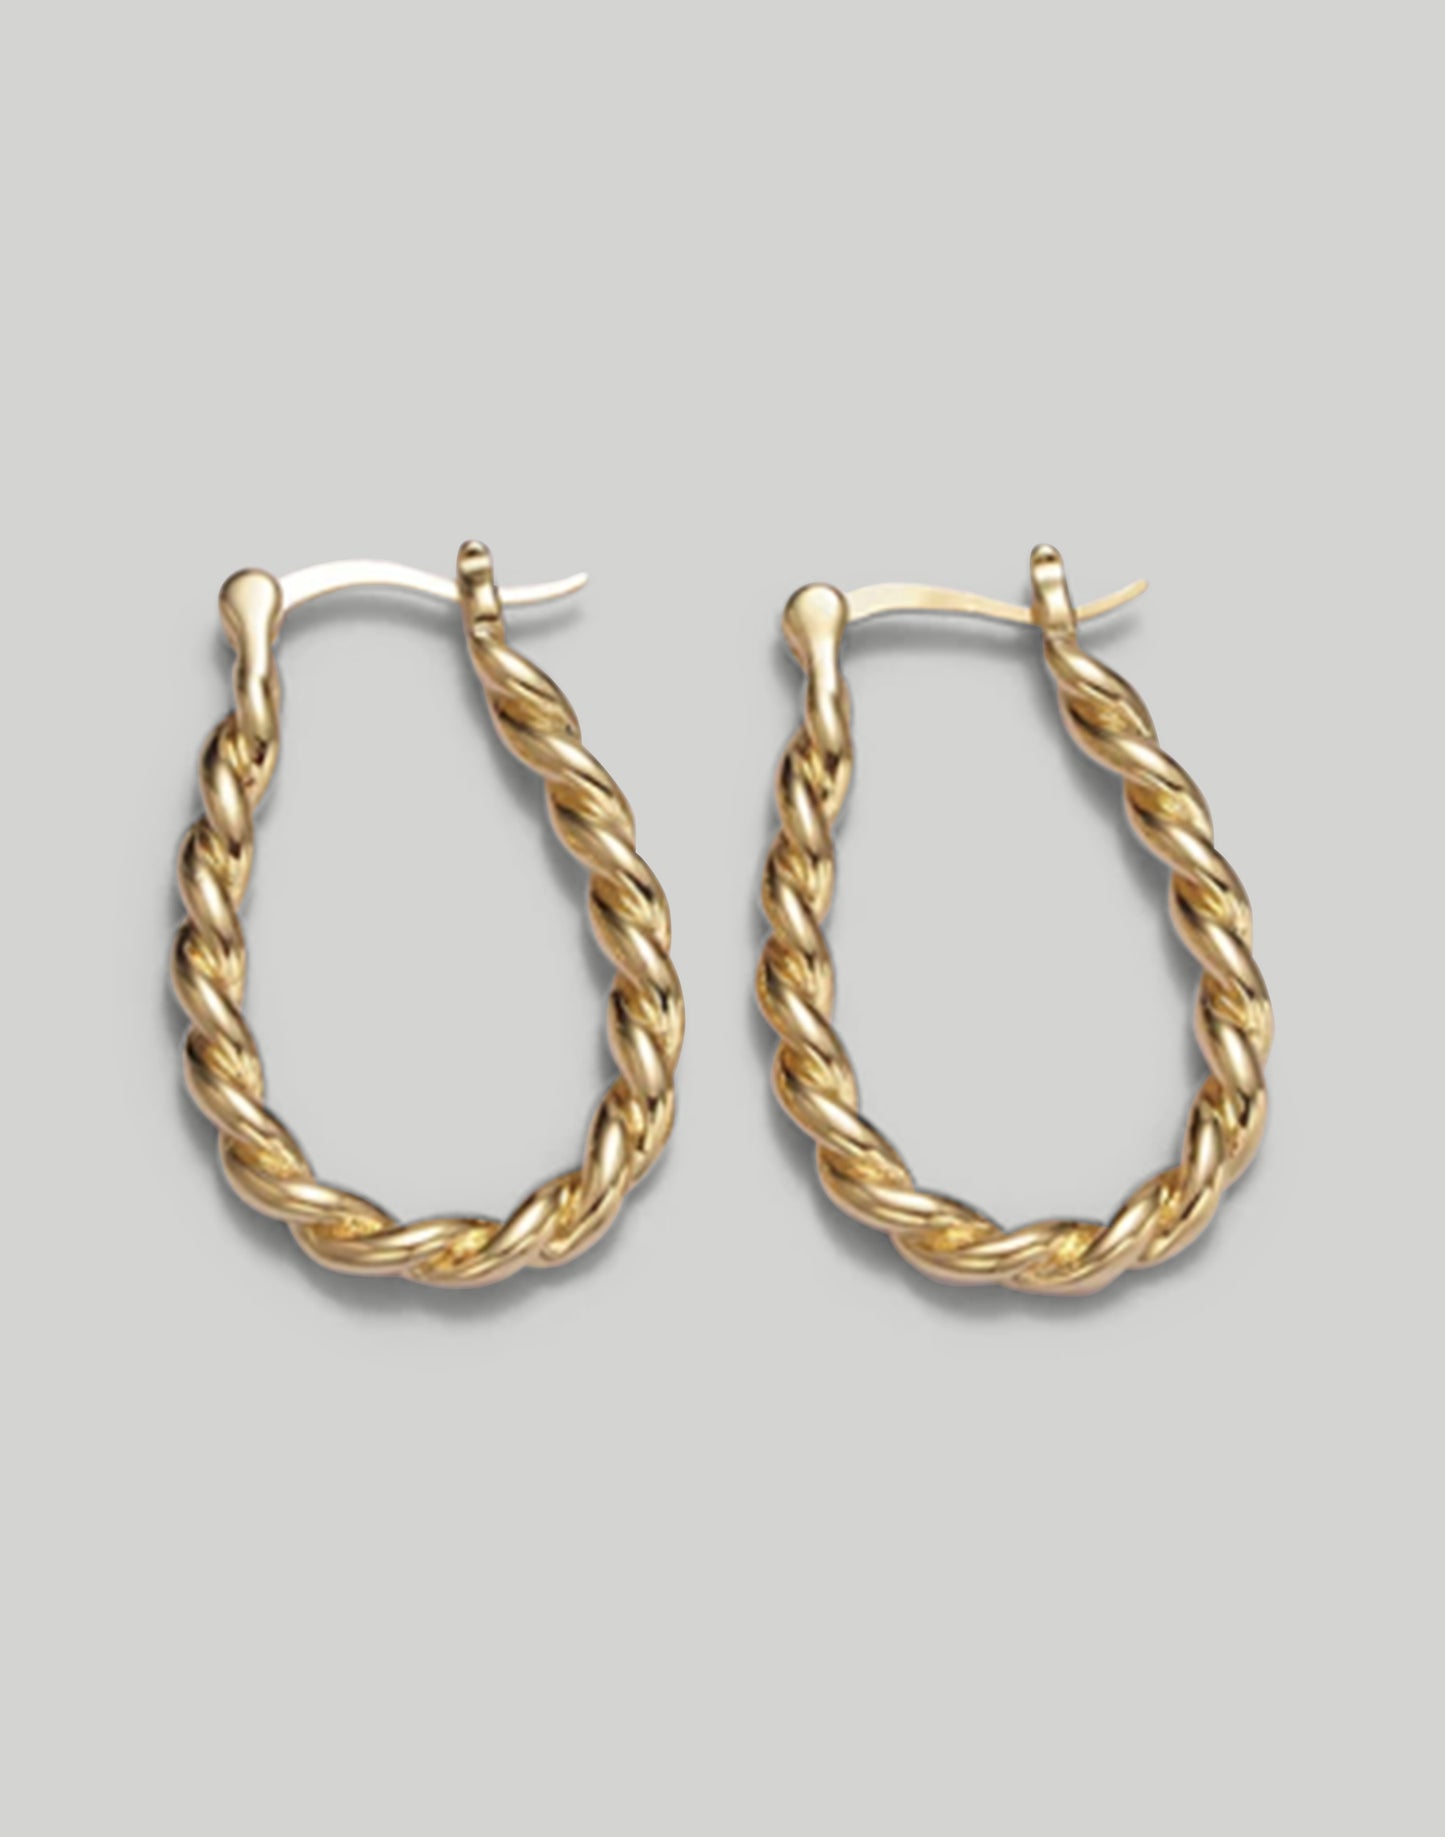 The French Rope Hoops